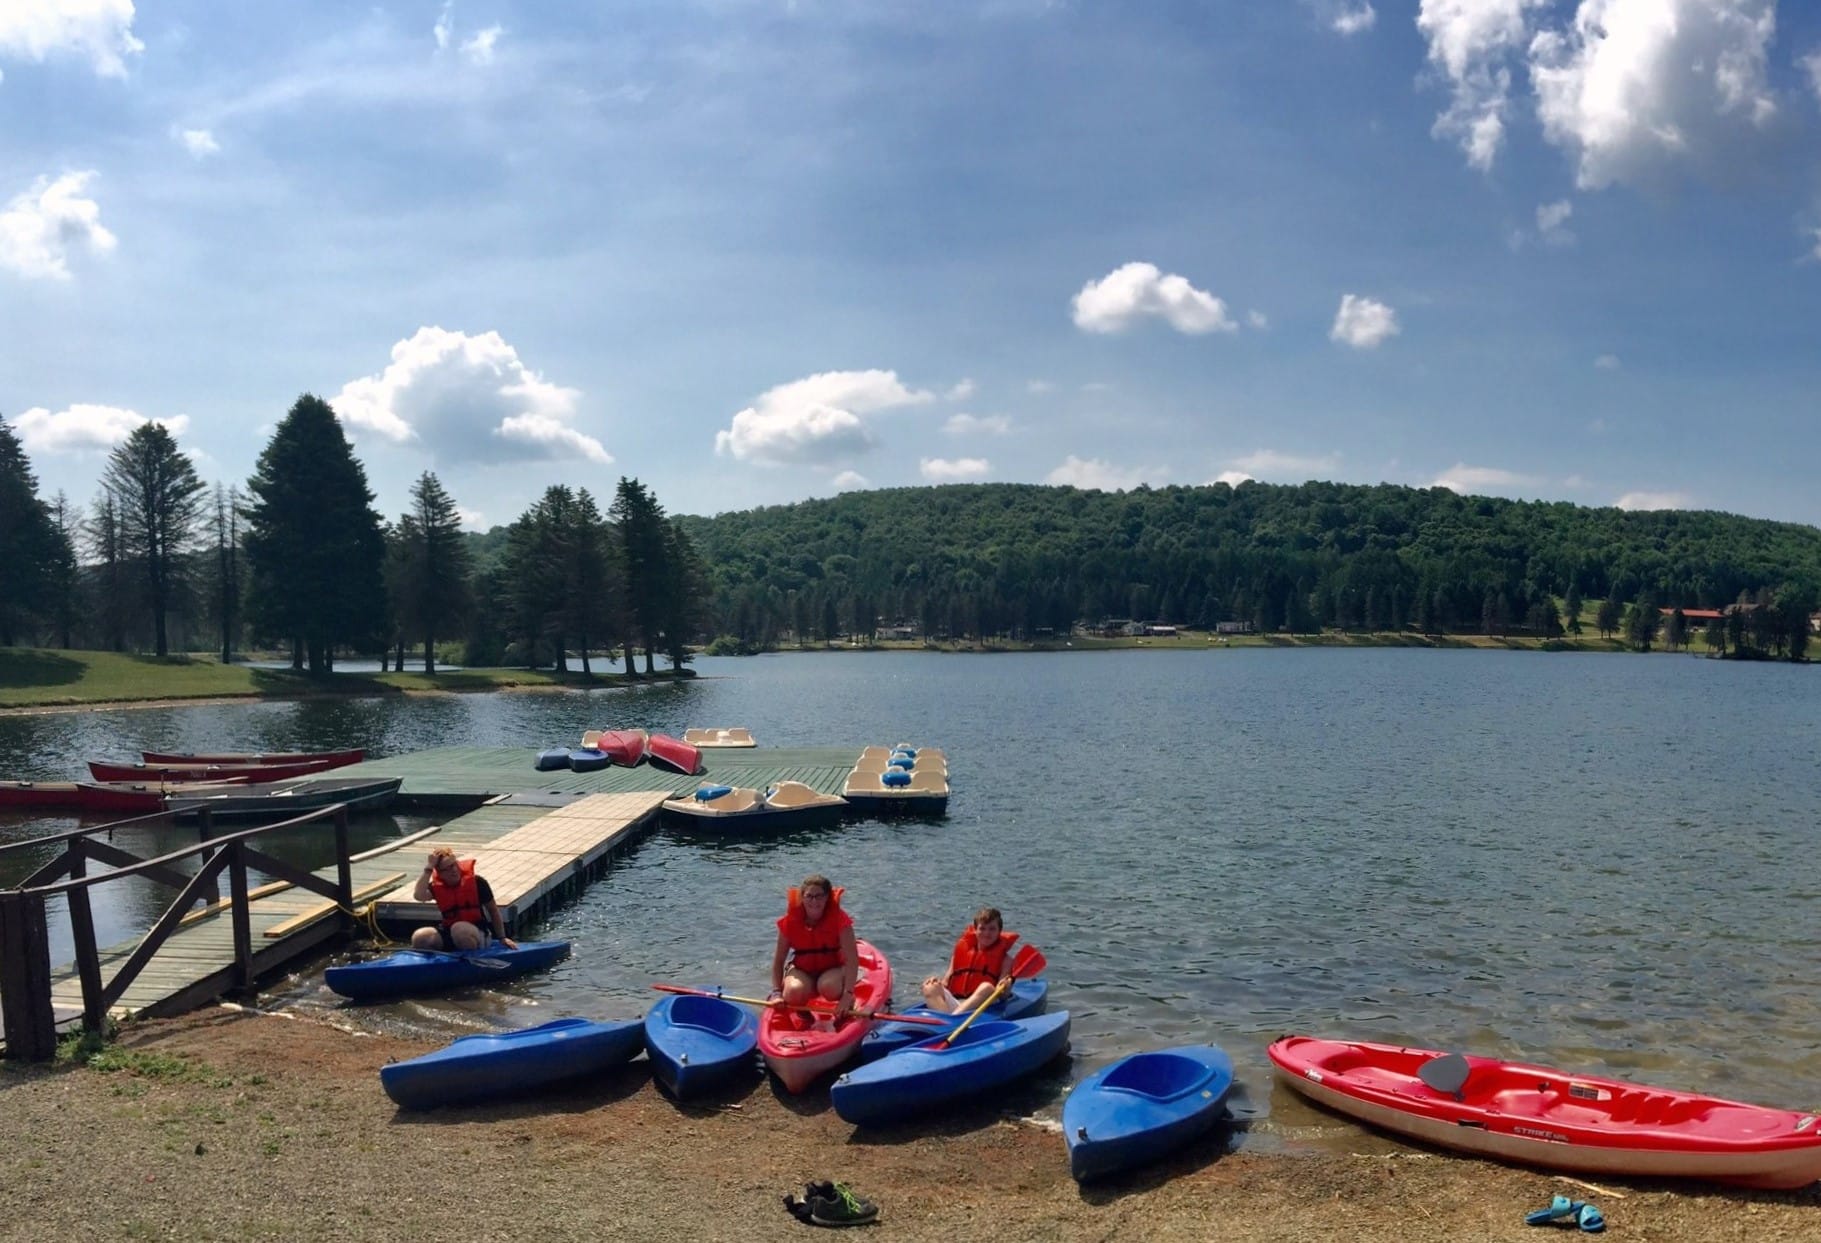 A group of people sit in kayaks on a dock overlooking a tranquil lake in western New York, enjoying their camping experience among cozy cabins.